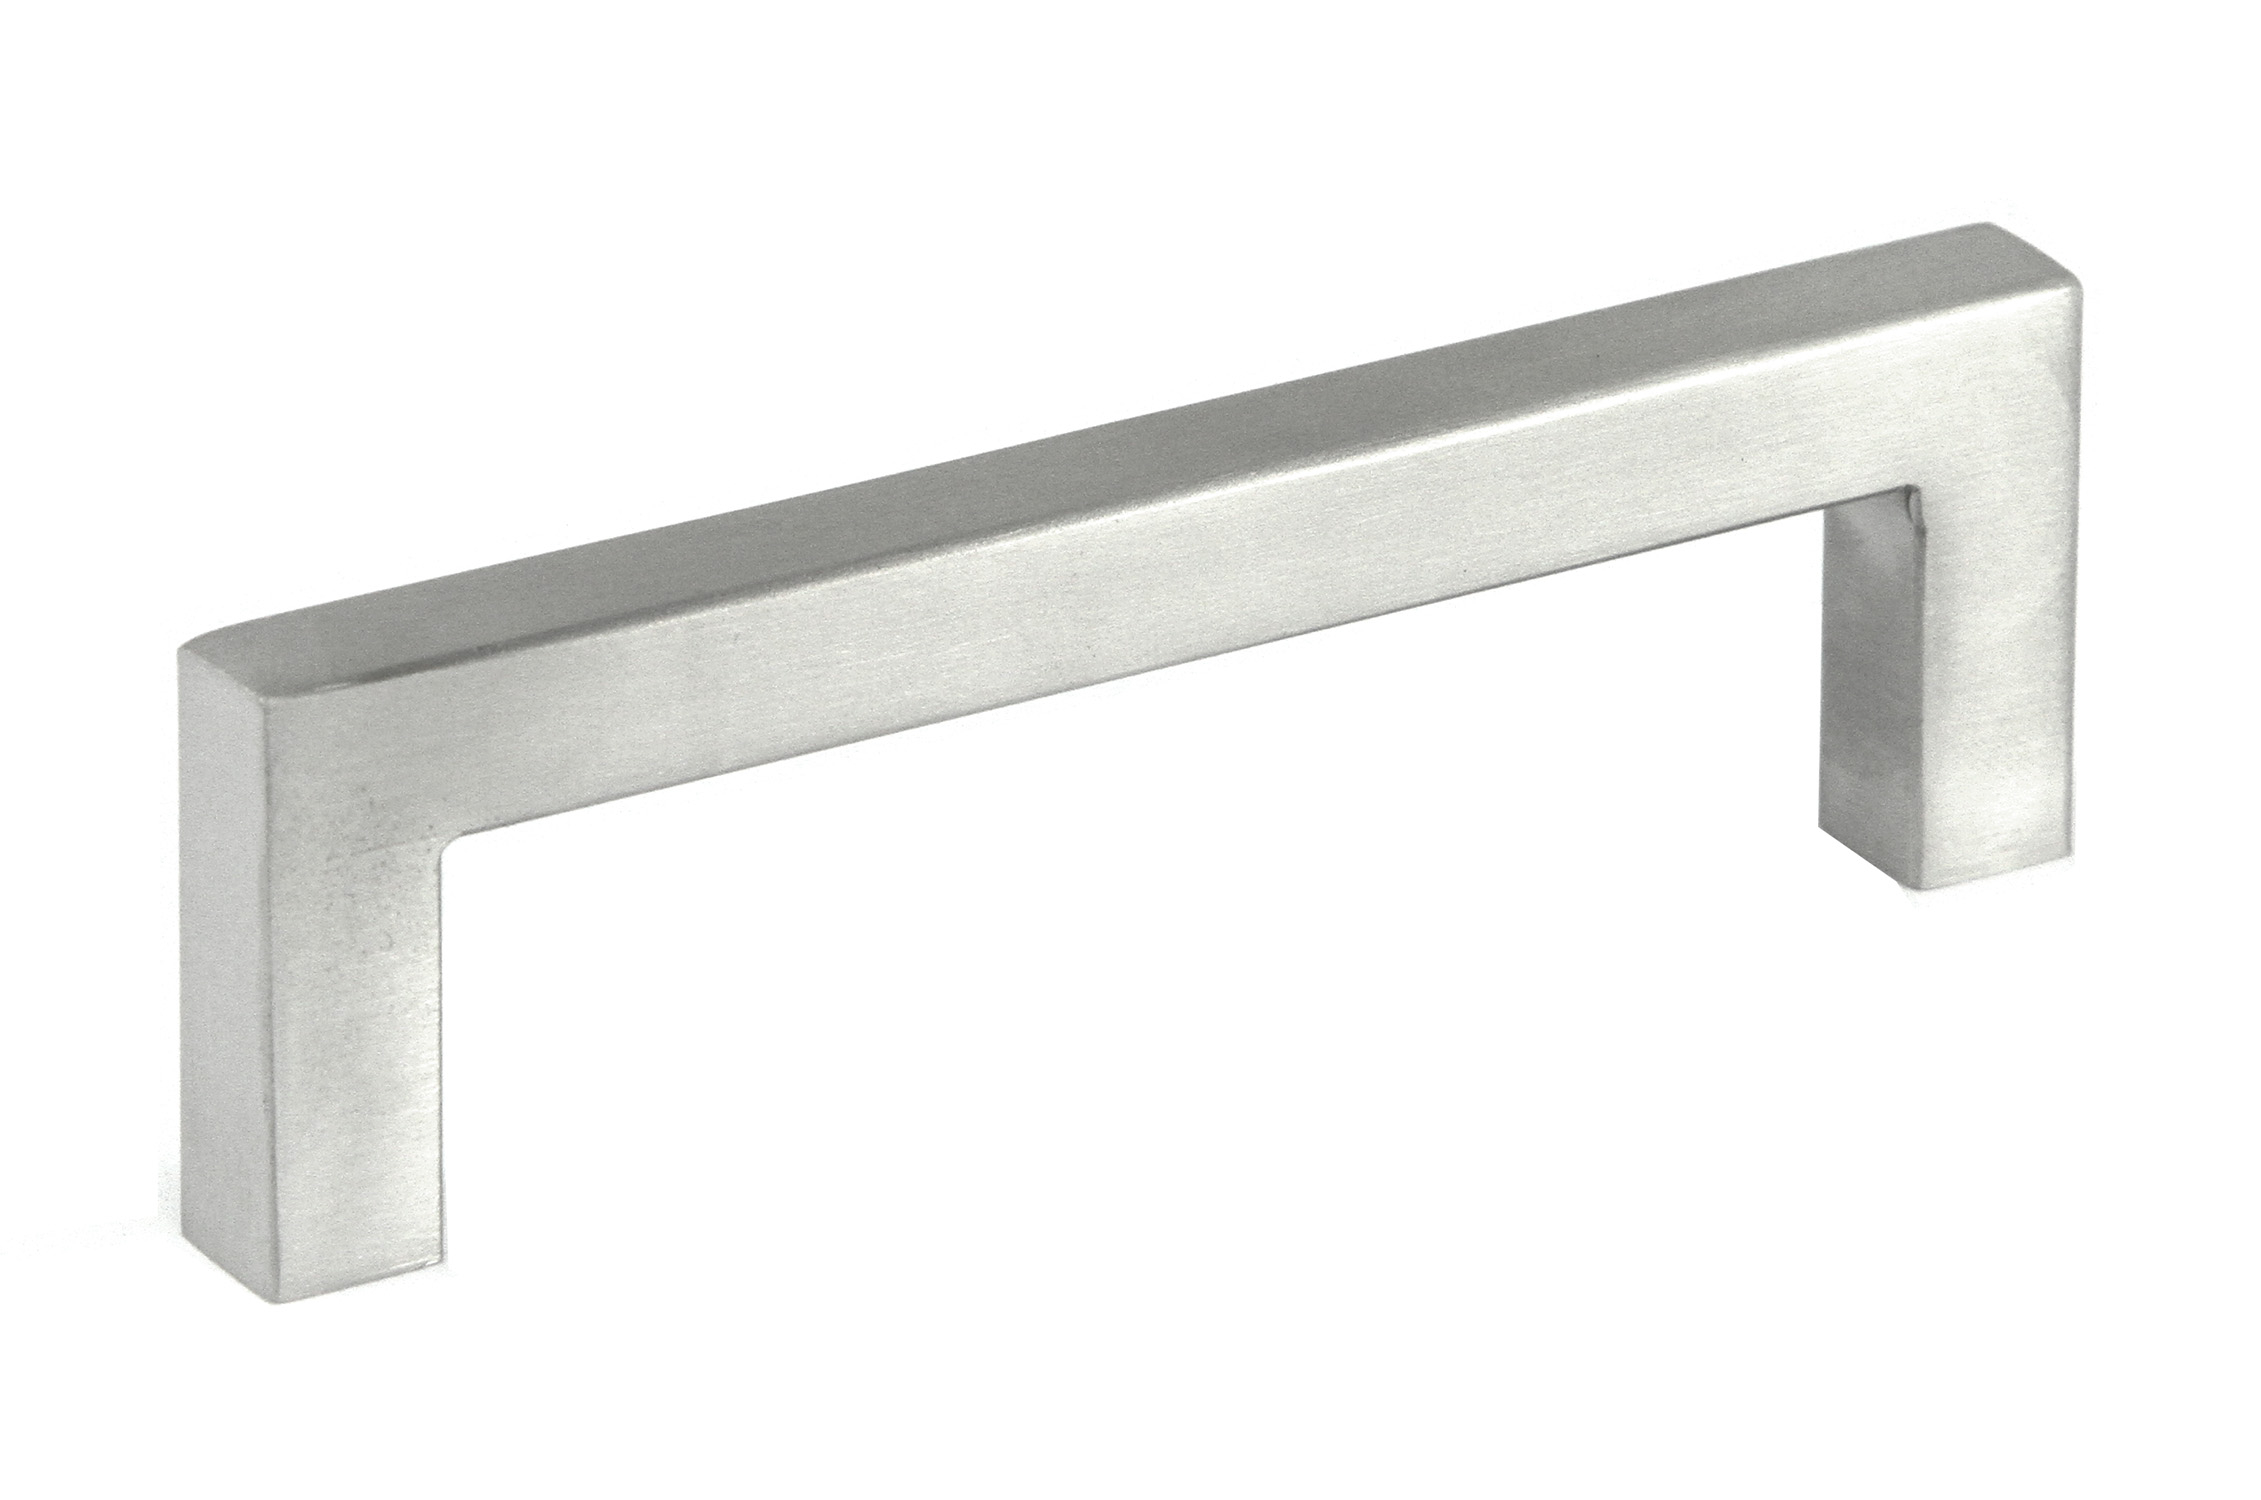 4 12 Classic Square Stainless Steel Kitchen Cabinet Bar pertaining to sizing 2261 X 1500